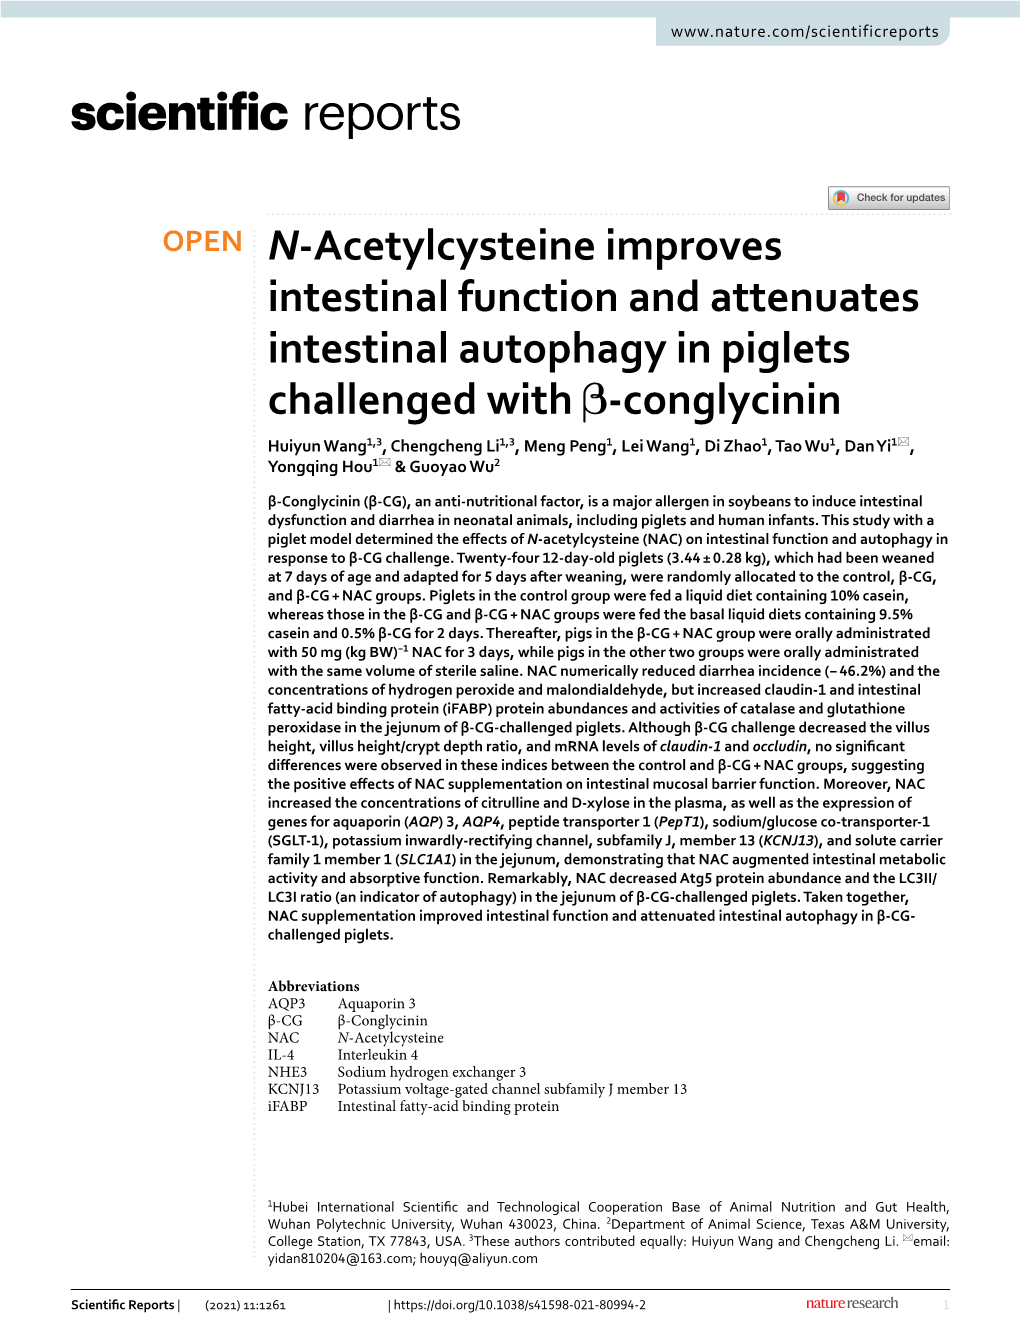 N-Acetylcysteine Improves Intestinal Function and Attenuates Intestinal